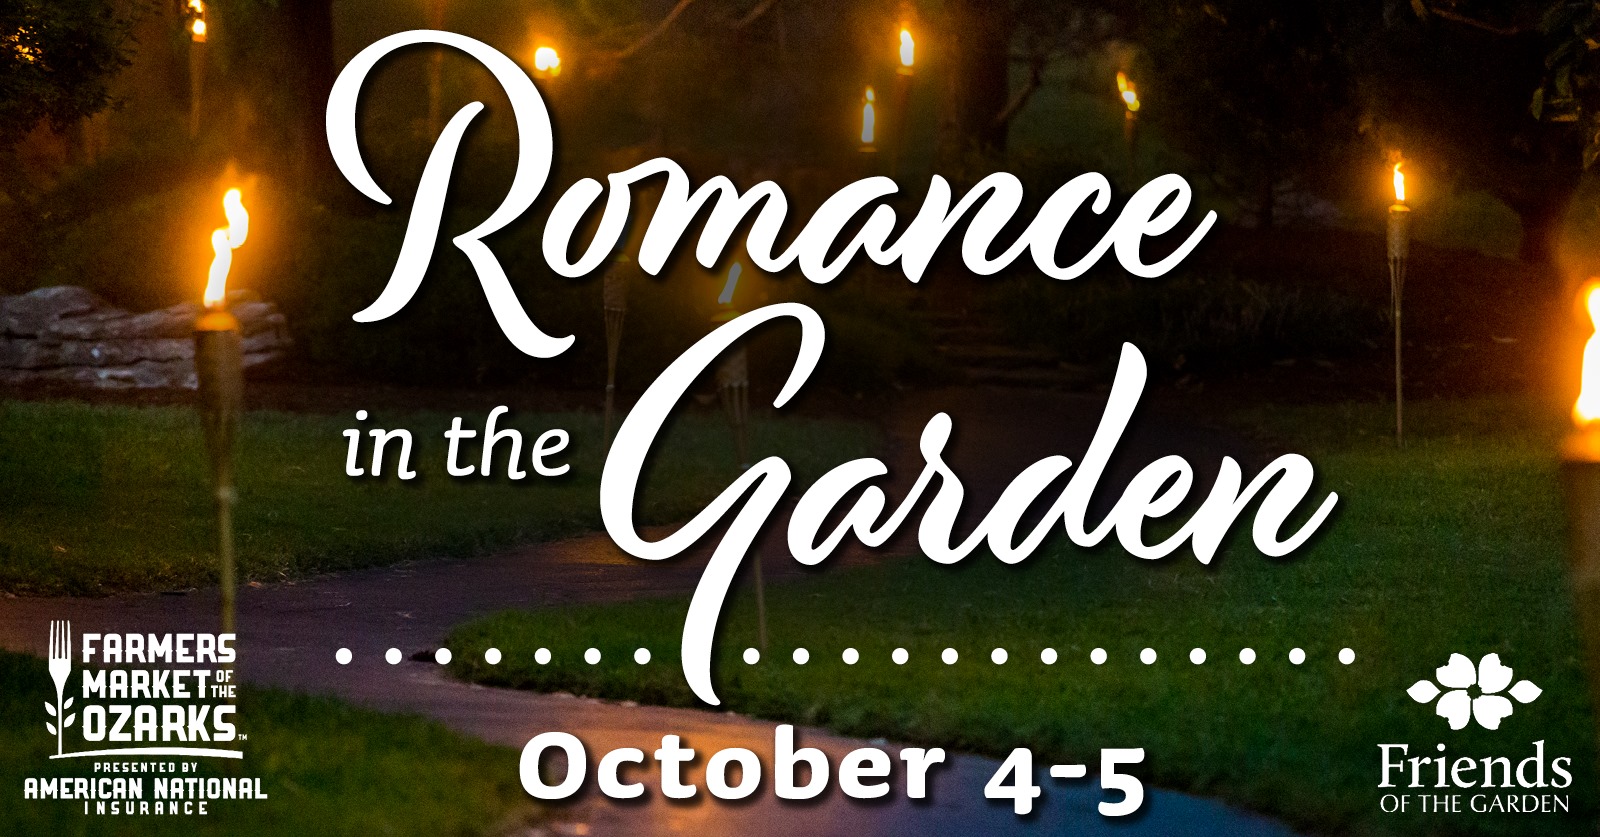 You are currently viewing Friends of the Garden and the Farmers Market of the Ozarks team up to provide unique Romance in the Garden events